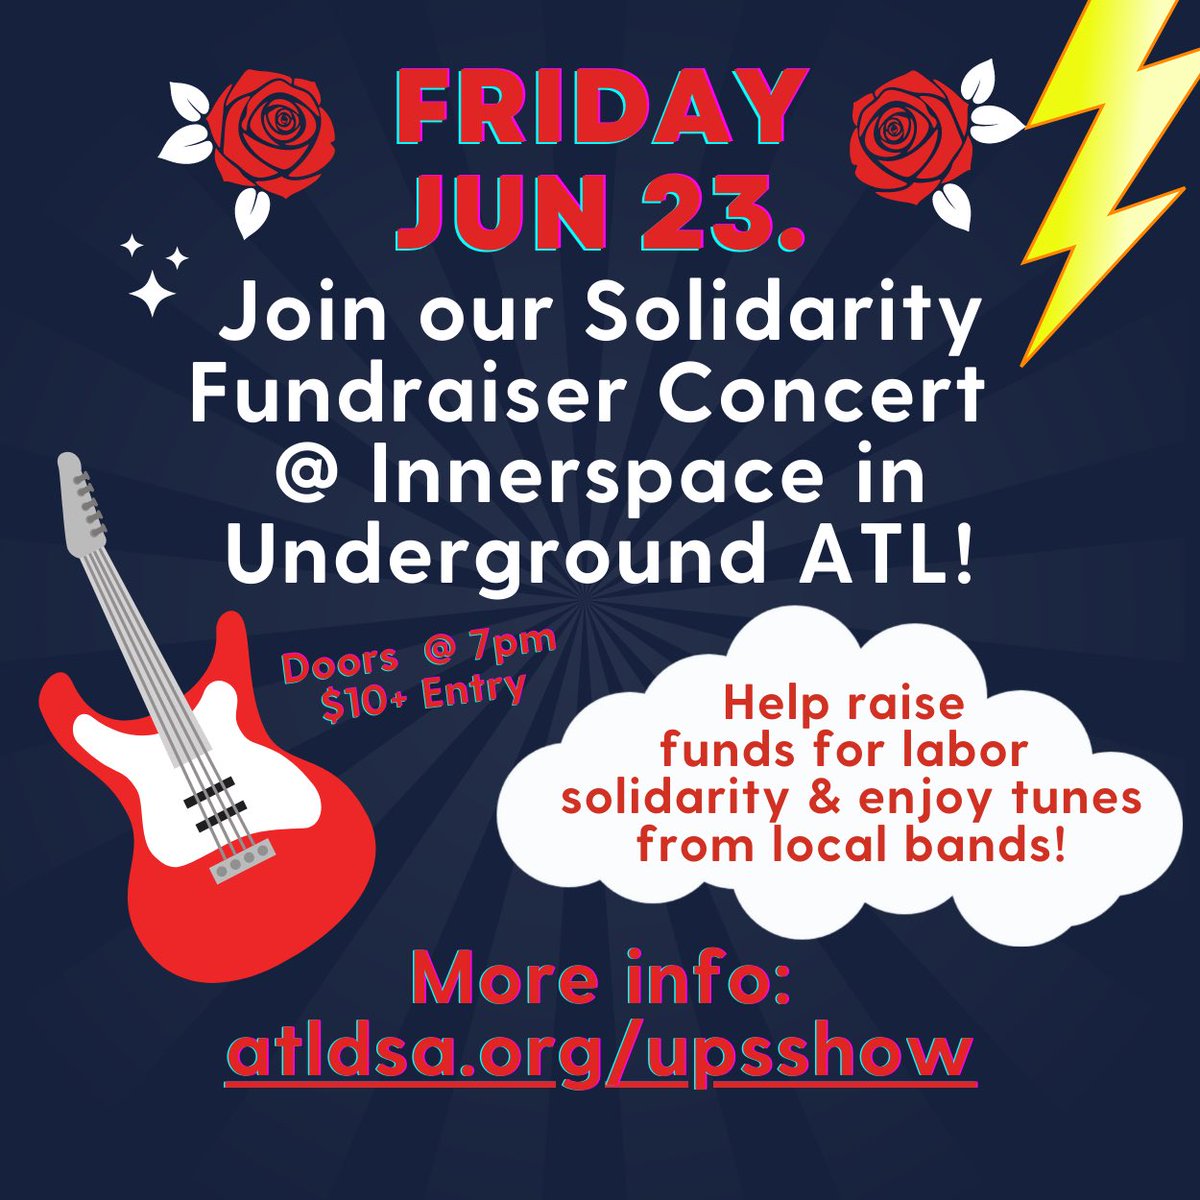 We’re celebrating w/ a weekend full of events to support UPS workers!

 🎸Friday June 23 @ 7PM ~ Come out to our solidarity fundraiser concert at Innerspace at Underground ATL to help us raise funds for food and materials on the picket line! REVP: atldsa.org/upsshow 💰